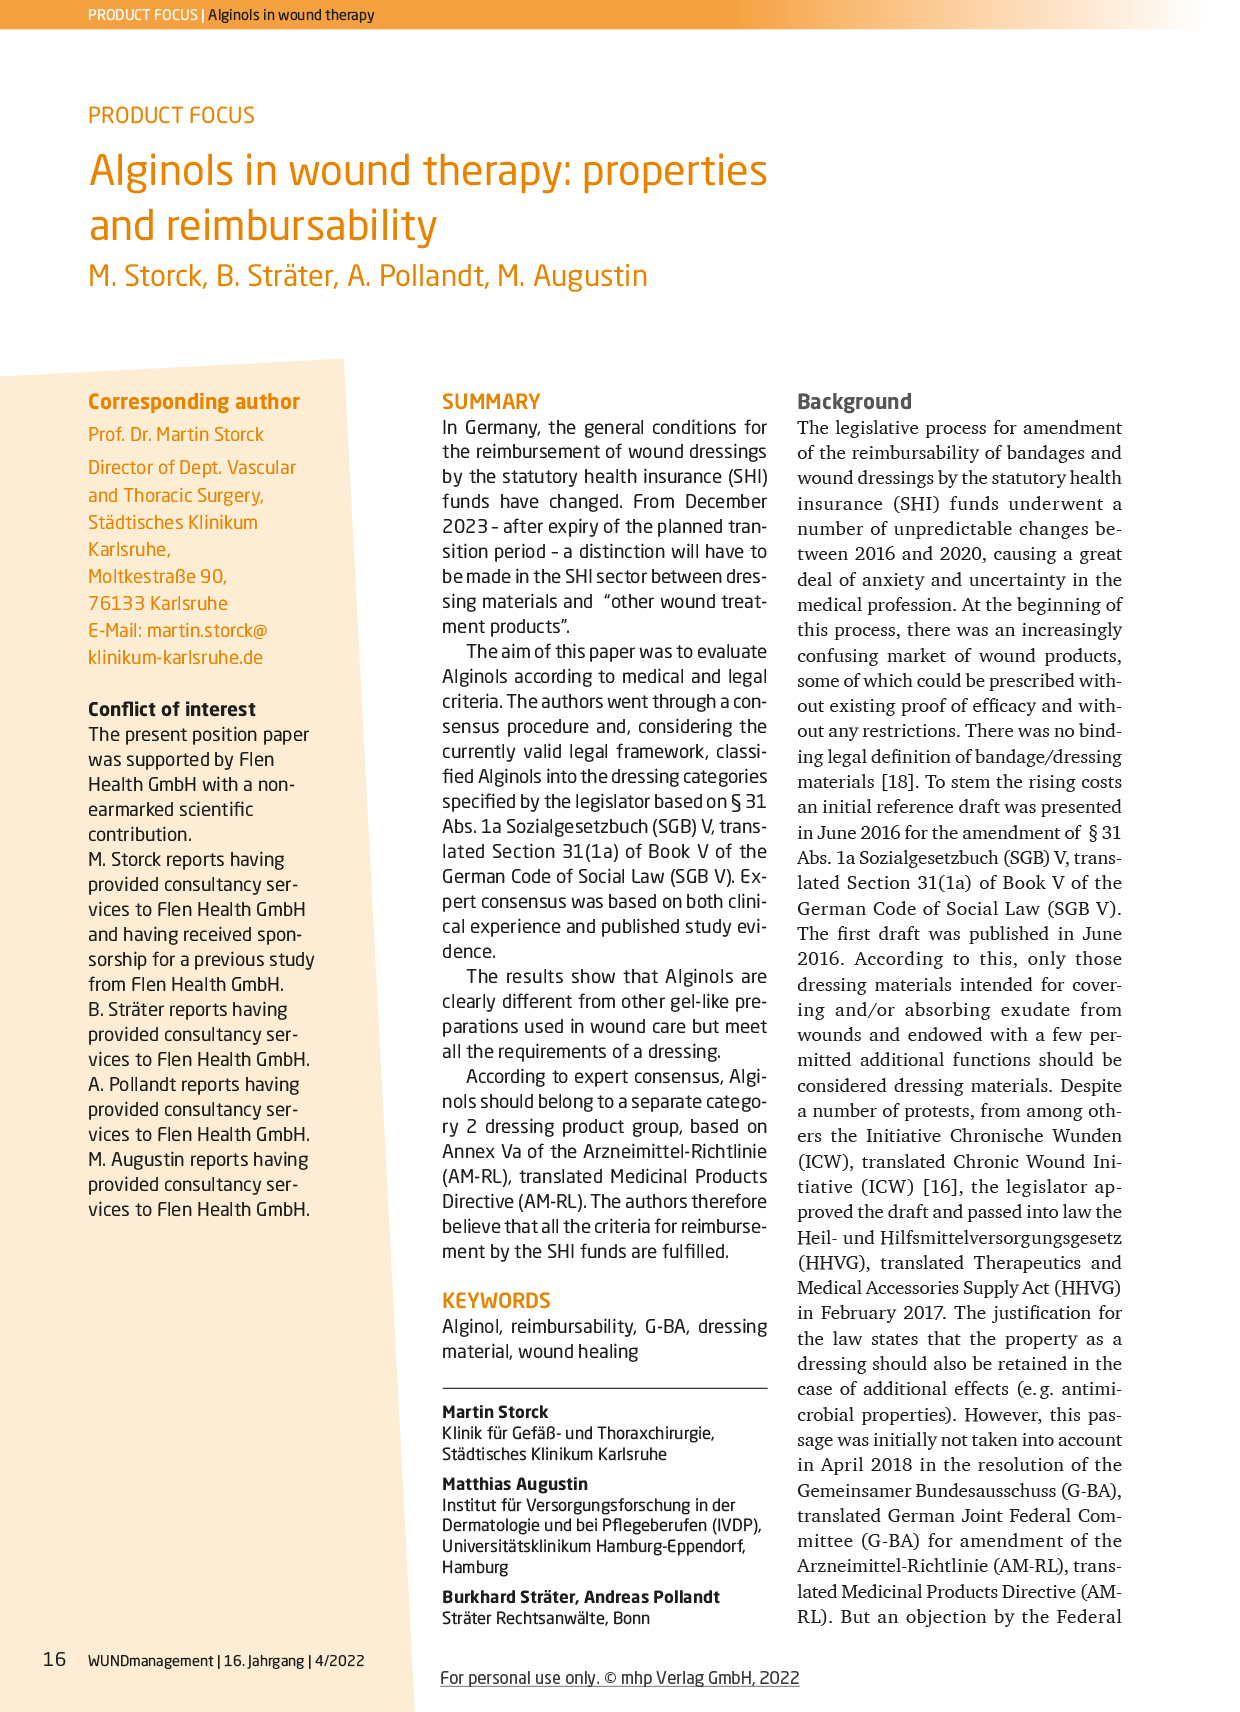 Alginols in wound therapy: properties and reimbursability: Picture of the first page of the article